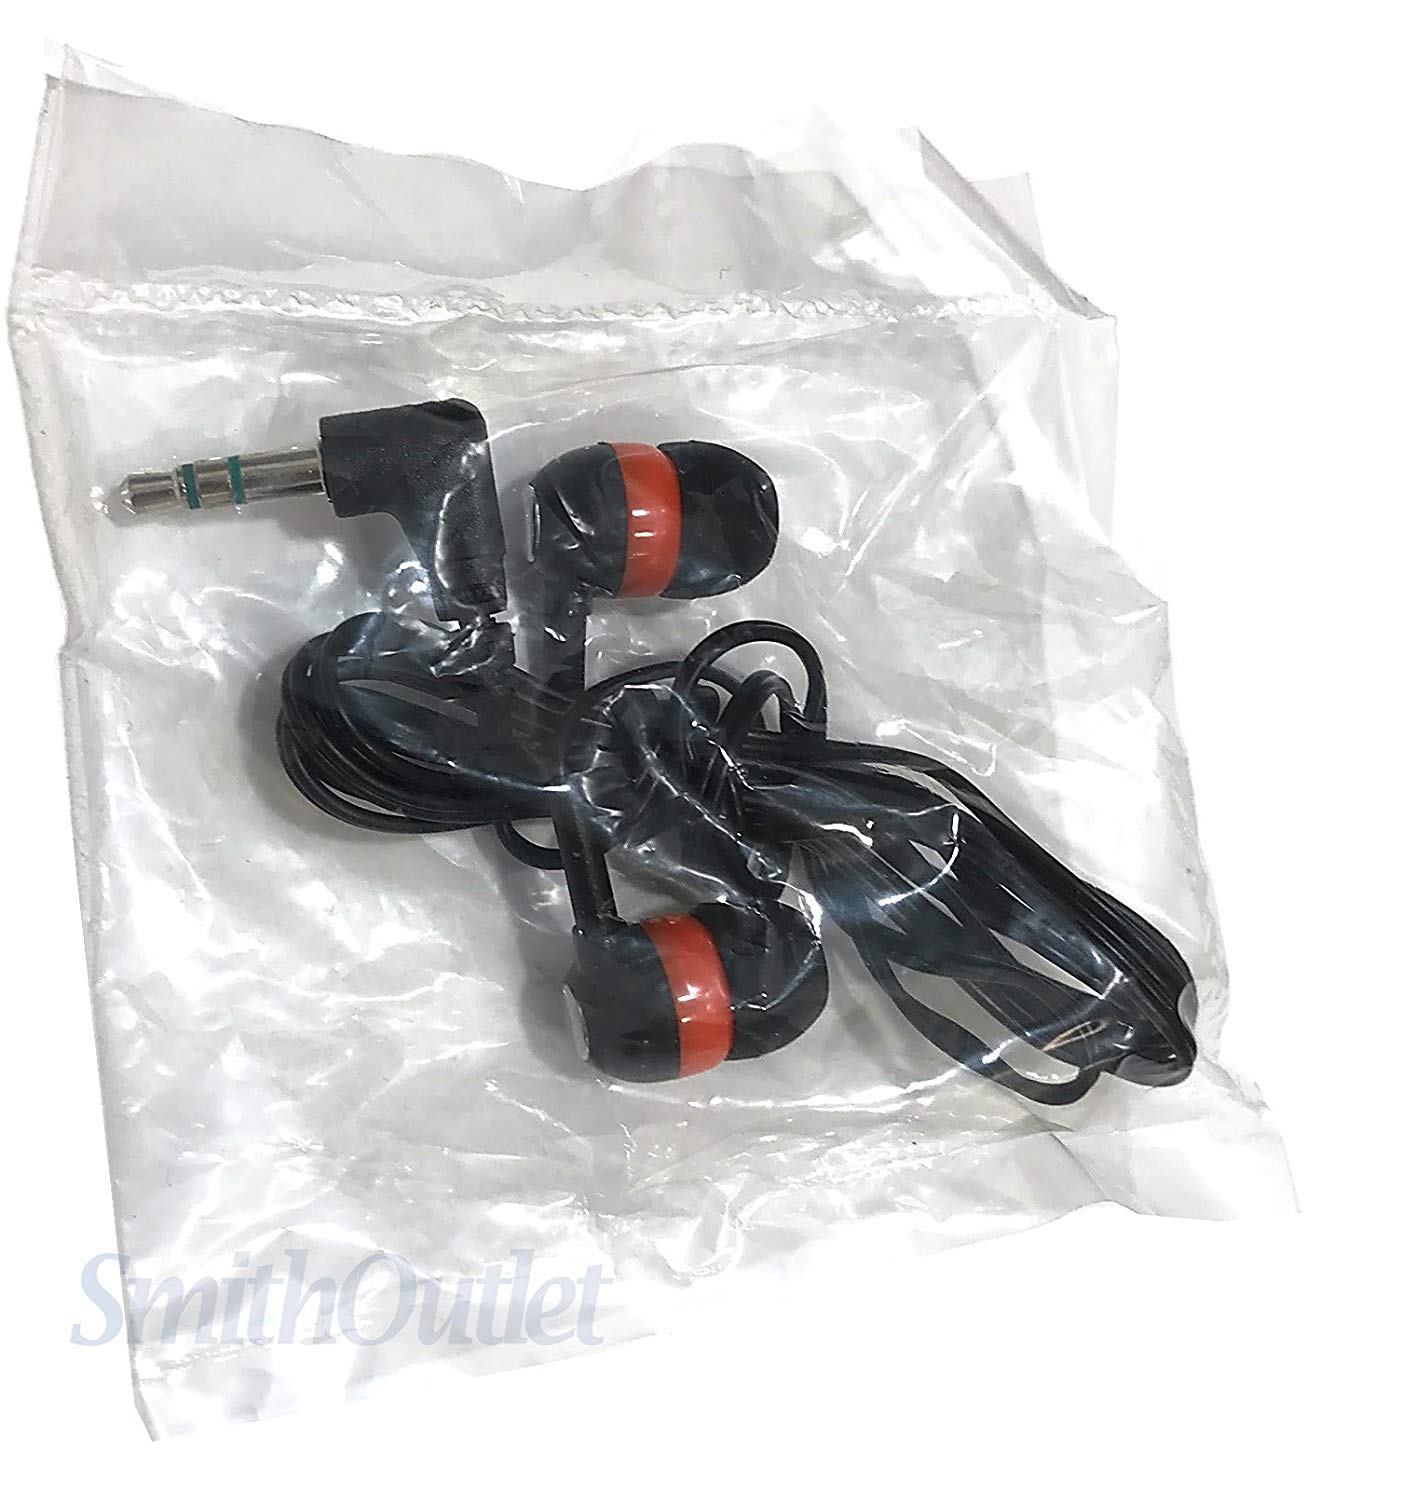 Individually packaged orange/black/chrome earbuds ready for distribution